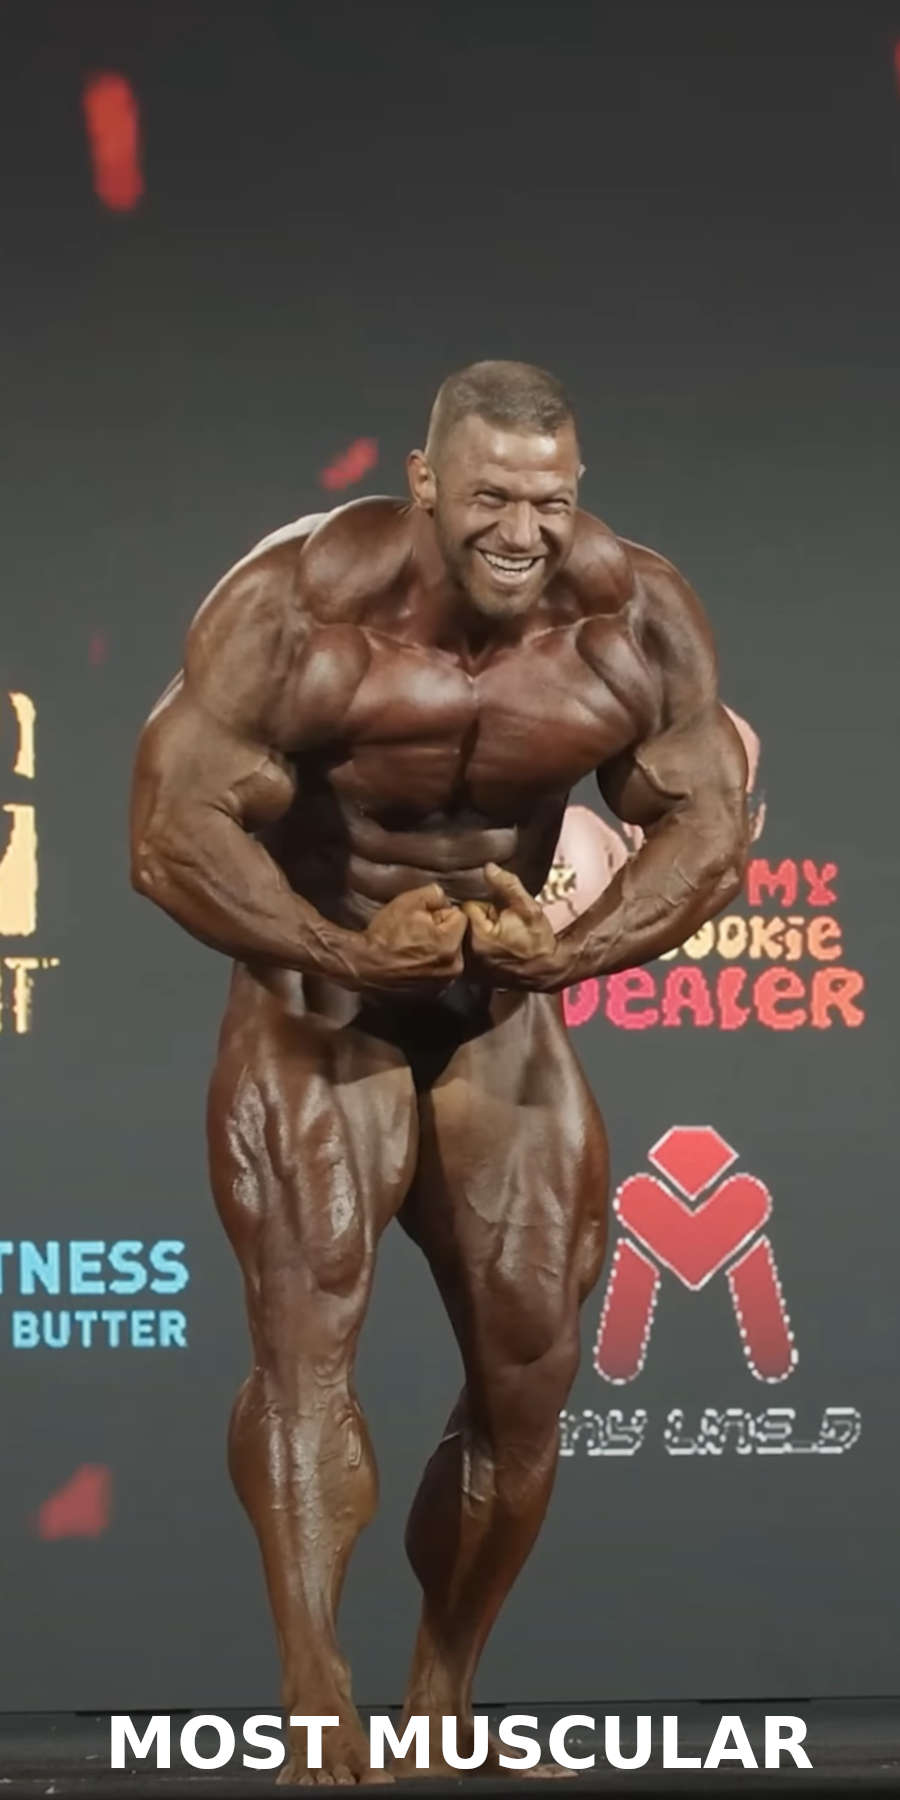 A bodybuilder performing the most muscular pose on stage during a bodybuilding competition 